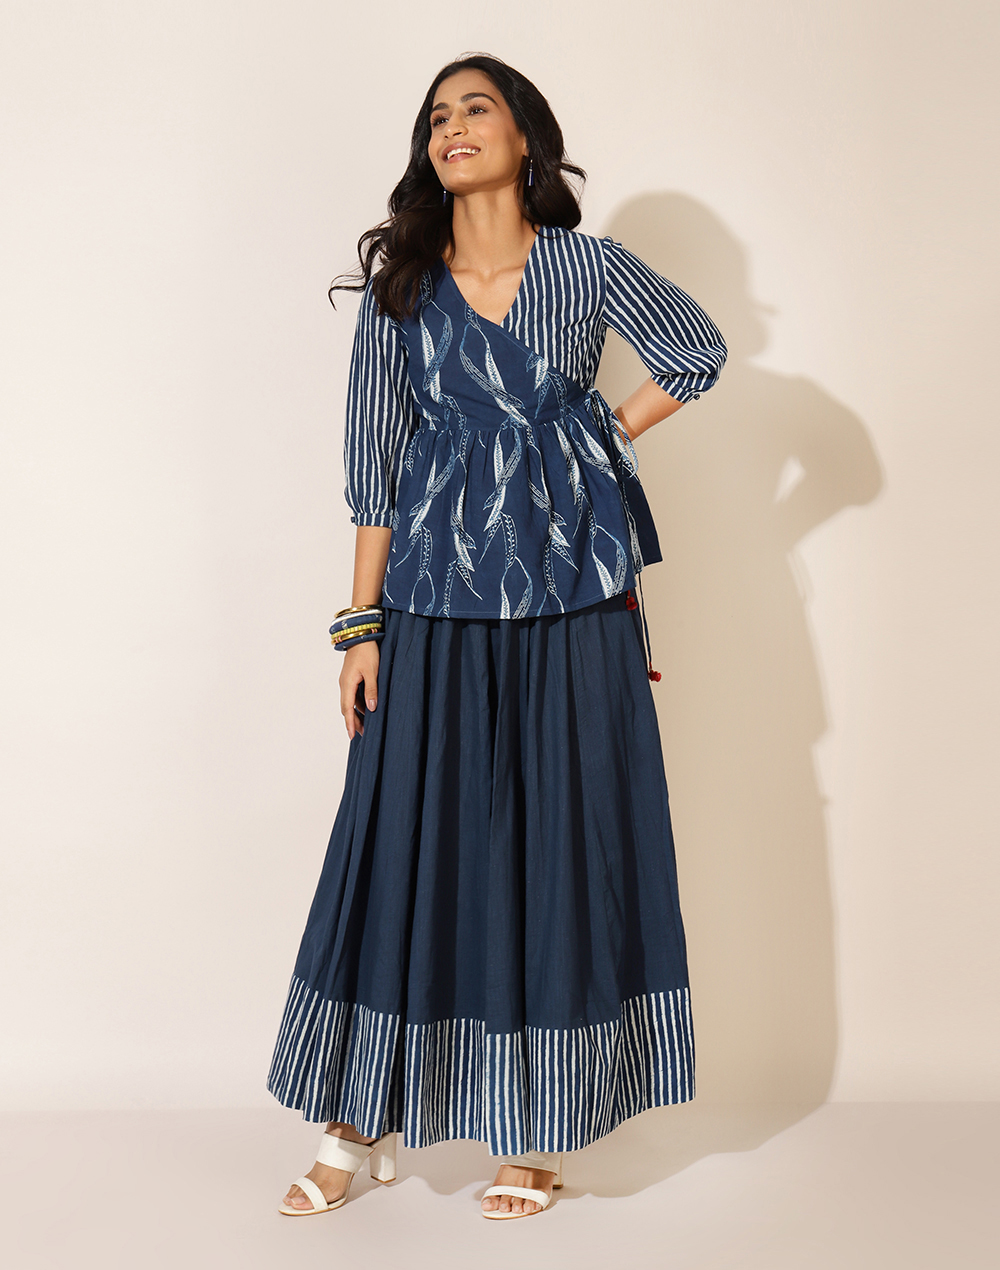 Ethnic Clothing African Women Skirts Sets PealsTop And For Bazin Riche  Party Long Skirt Set WY6972 From Alberty, $51.25 | DHgate.Com